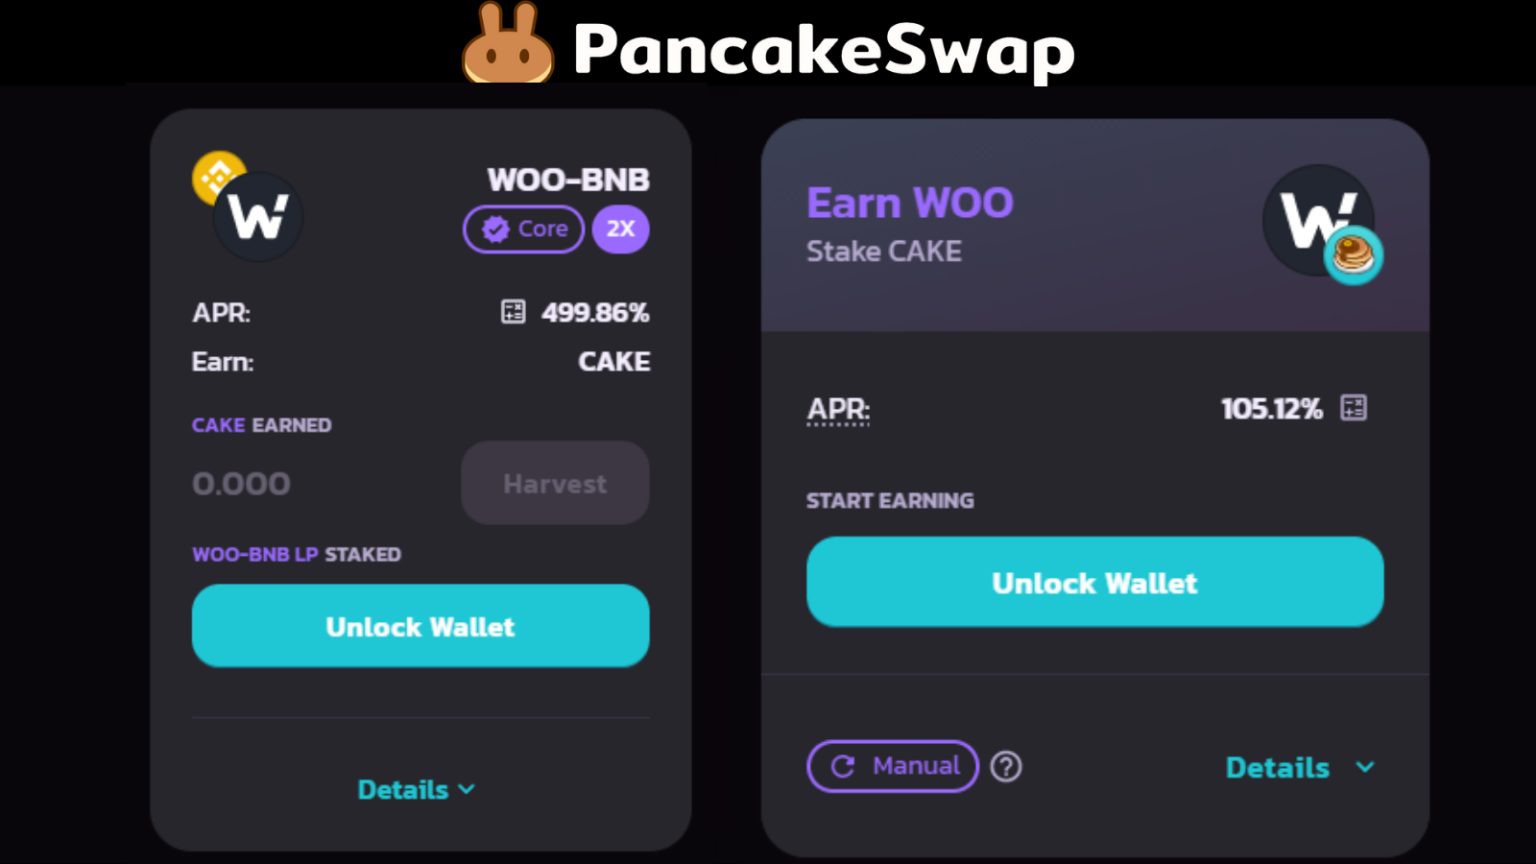 Wootrade Farm And Syrup Pool On PancakeSwap - Smart ...